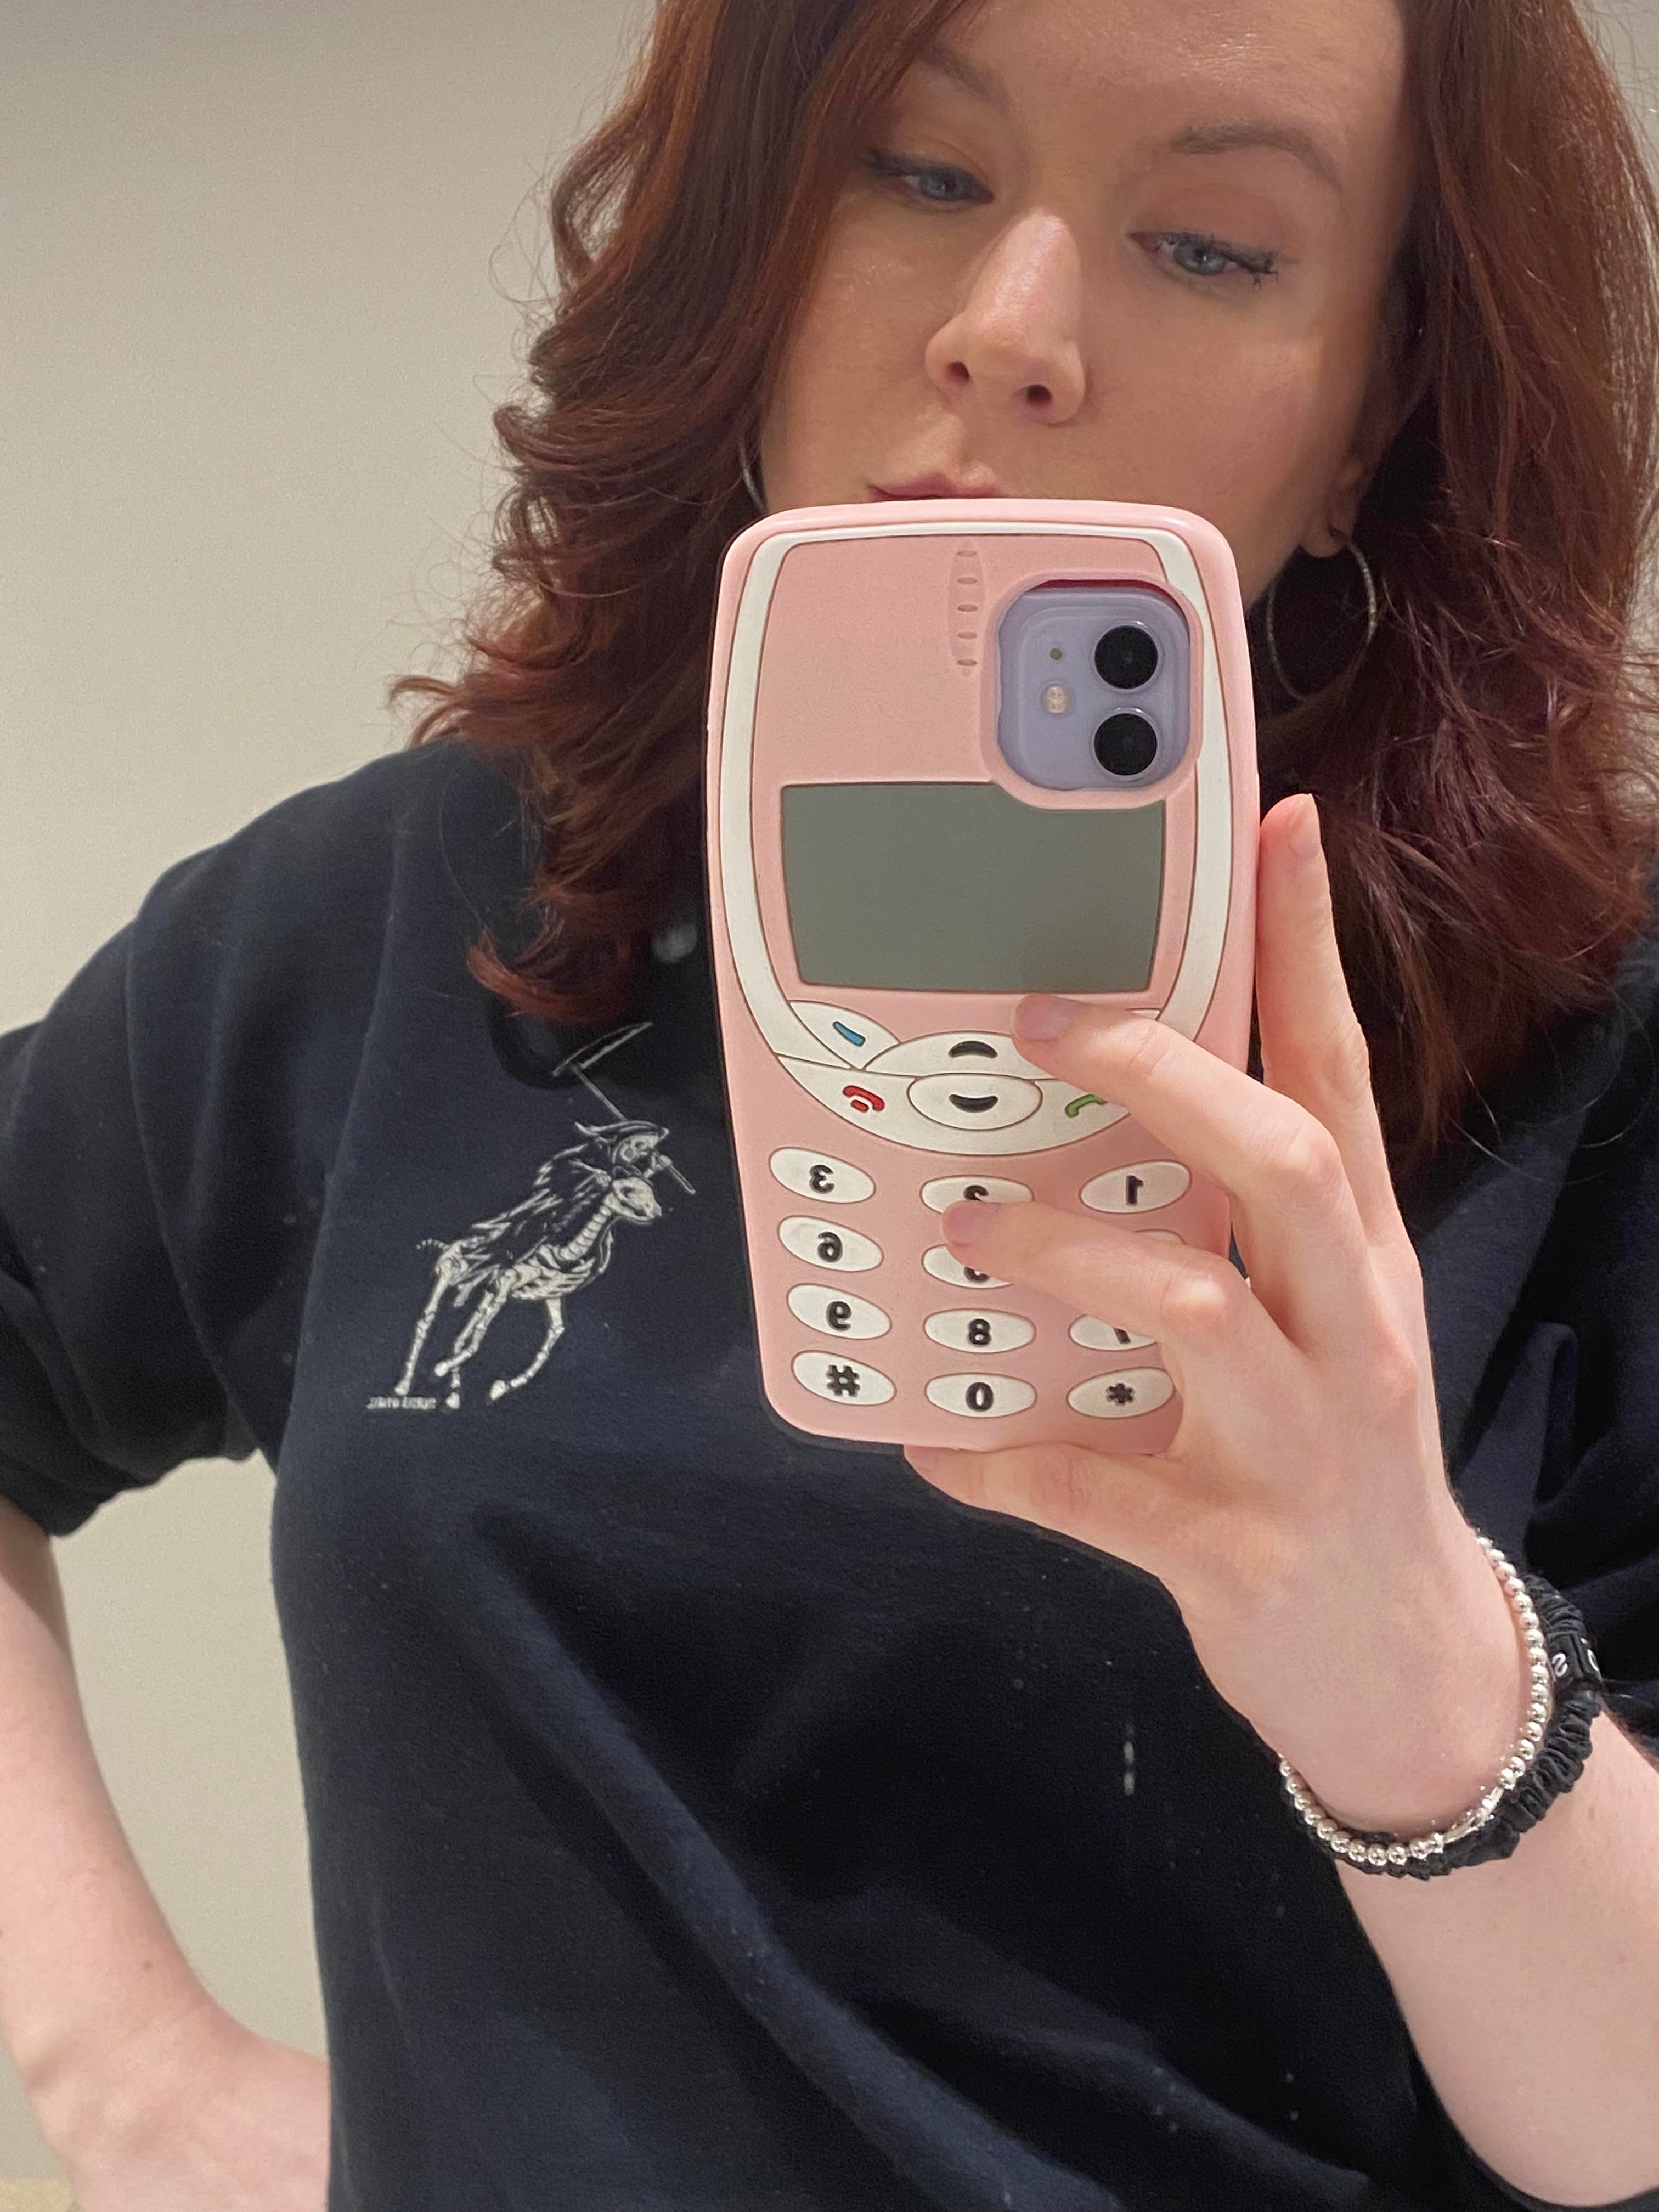 BuzzFeed editor Elizabeth Lilly holds cellphone with pink Nokia-inspired cell phone case covering it